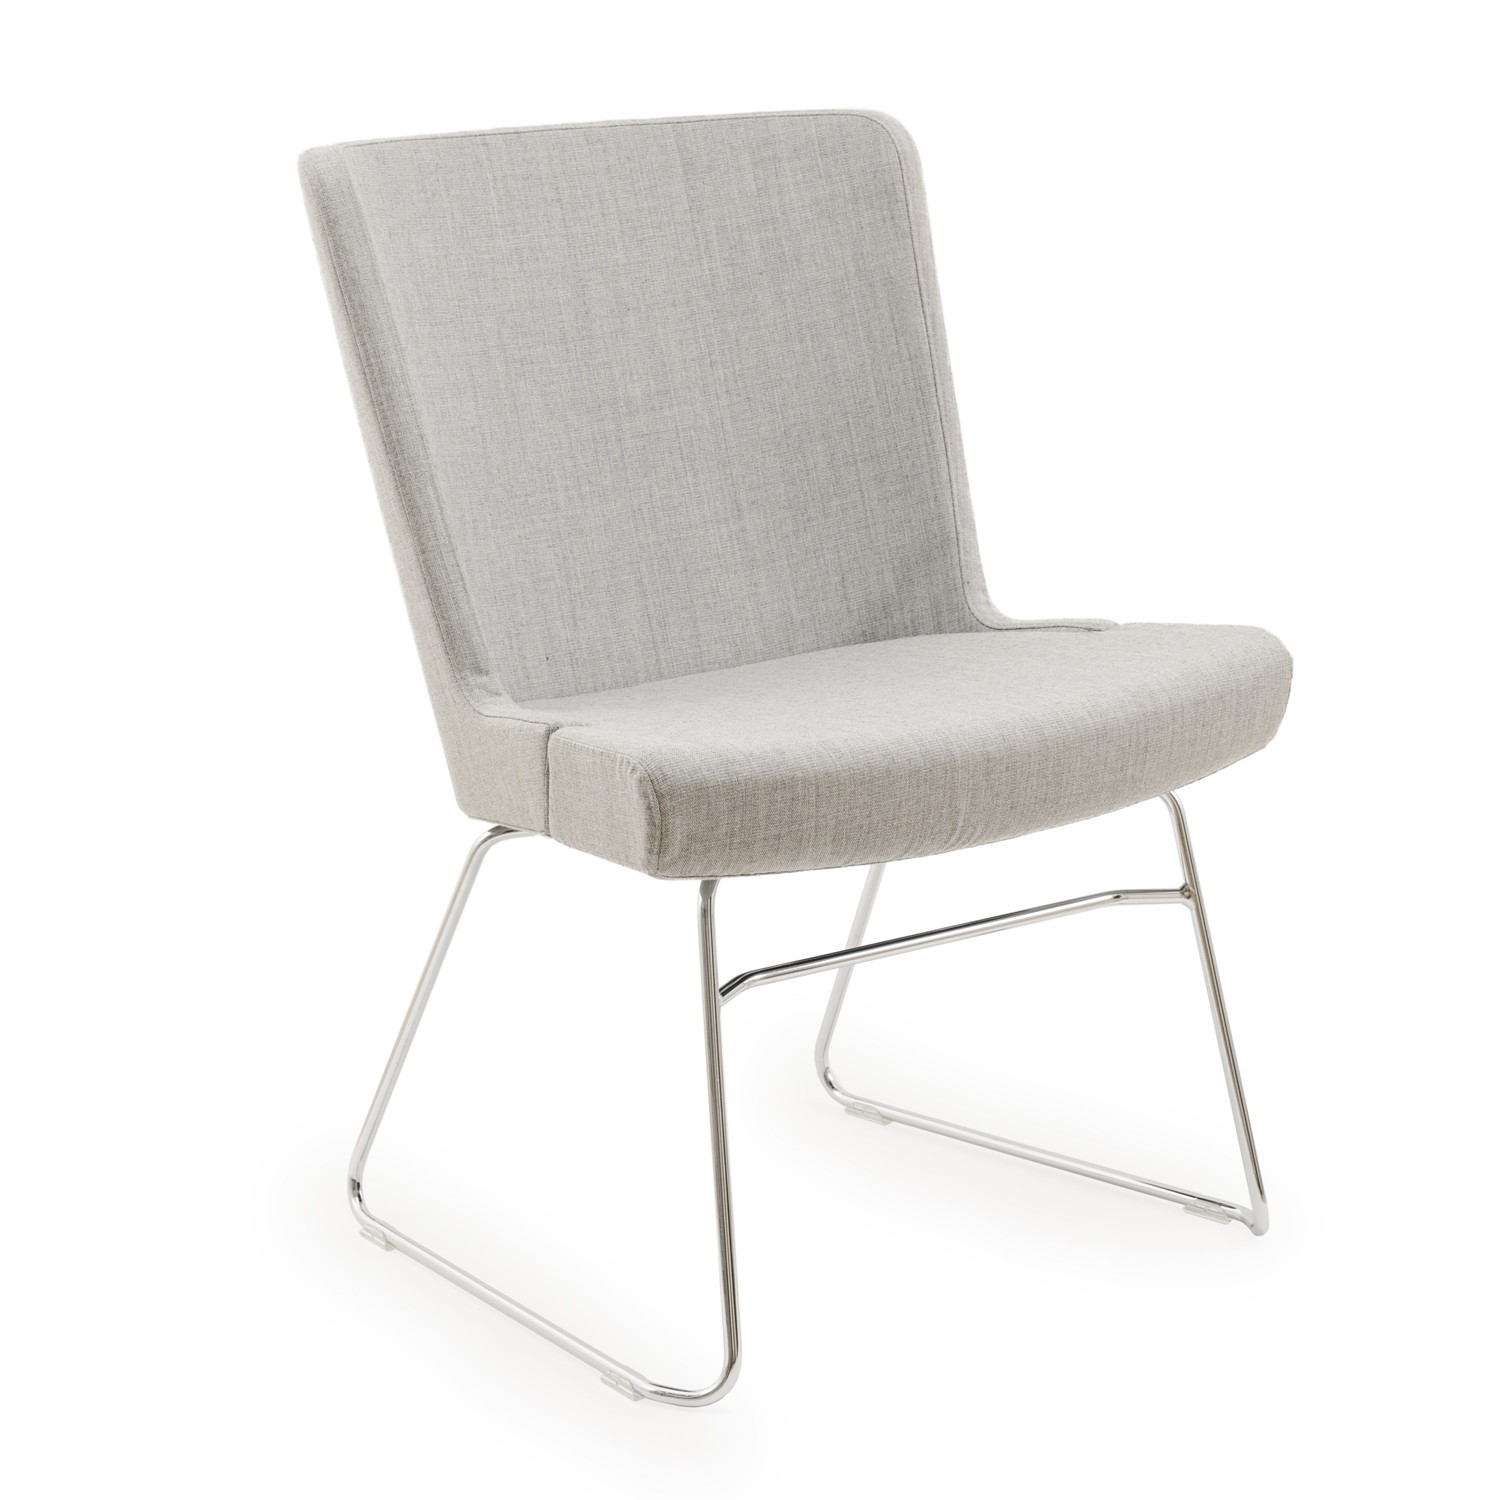 Heydon Fully Upholstered Chair (No Arms)